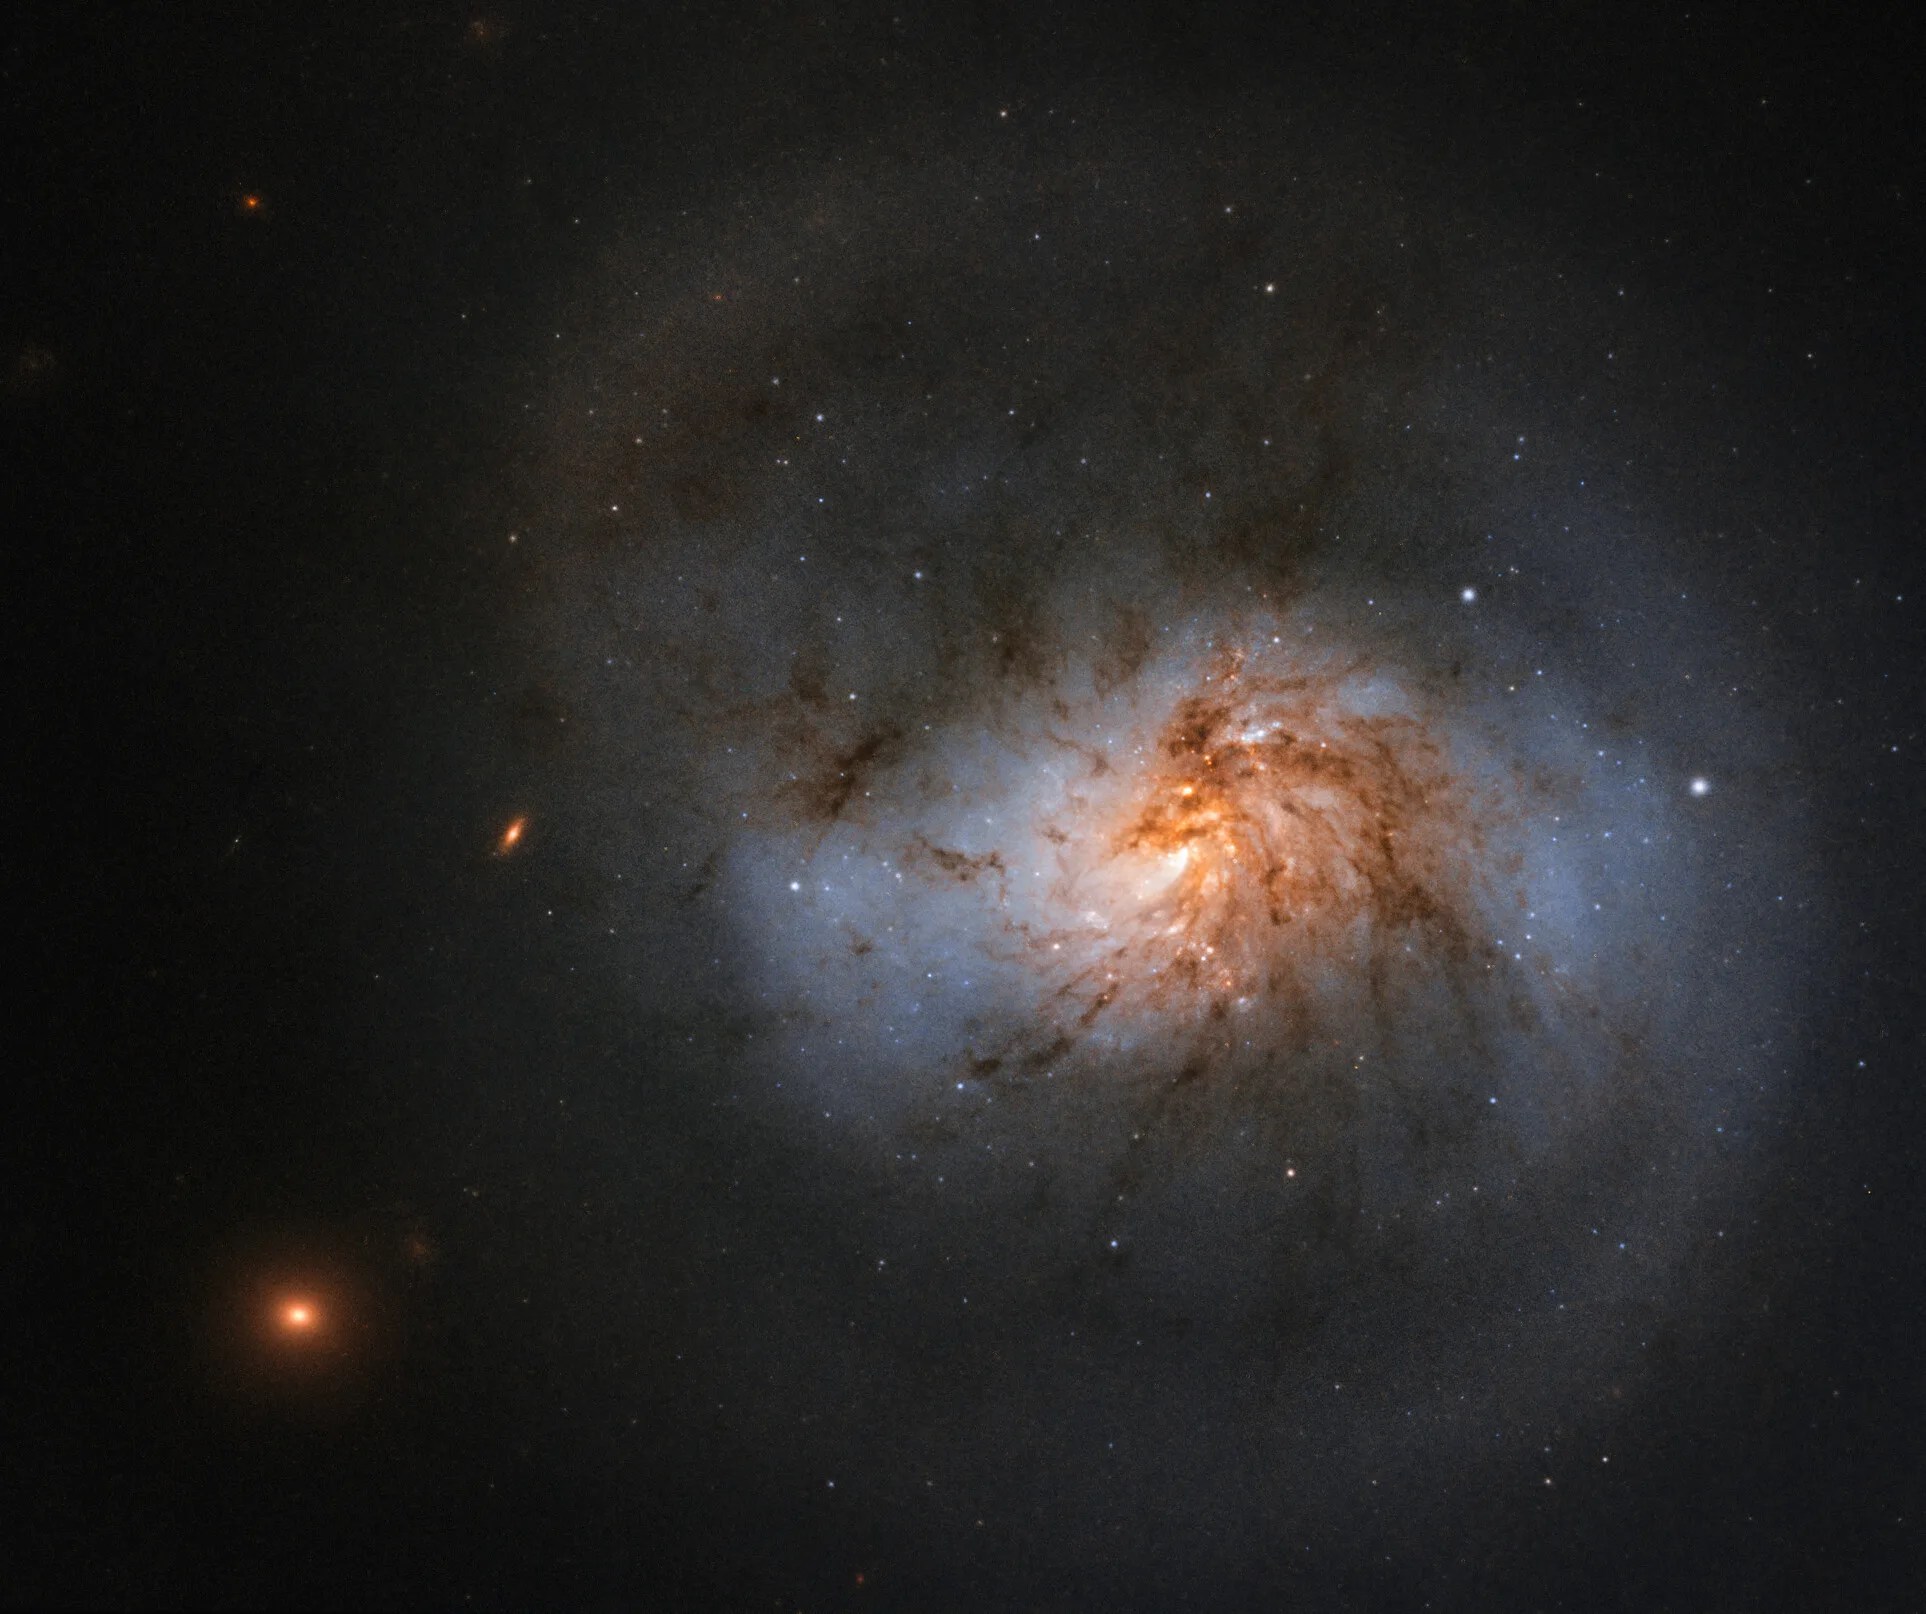 Swirled galaxy with bright center against dark backdrop of space